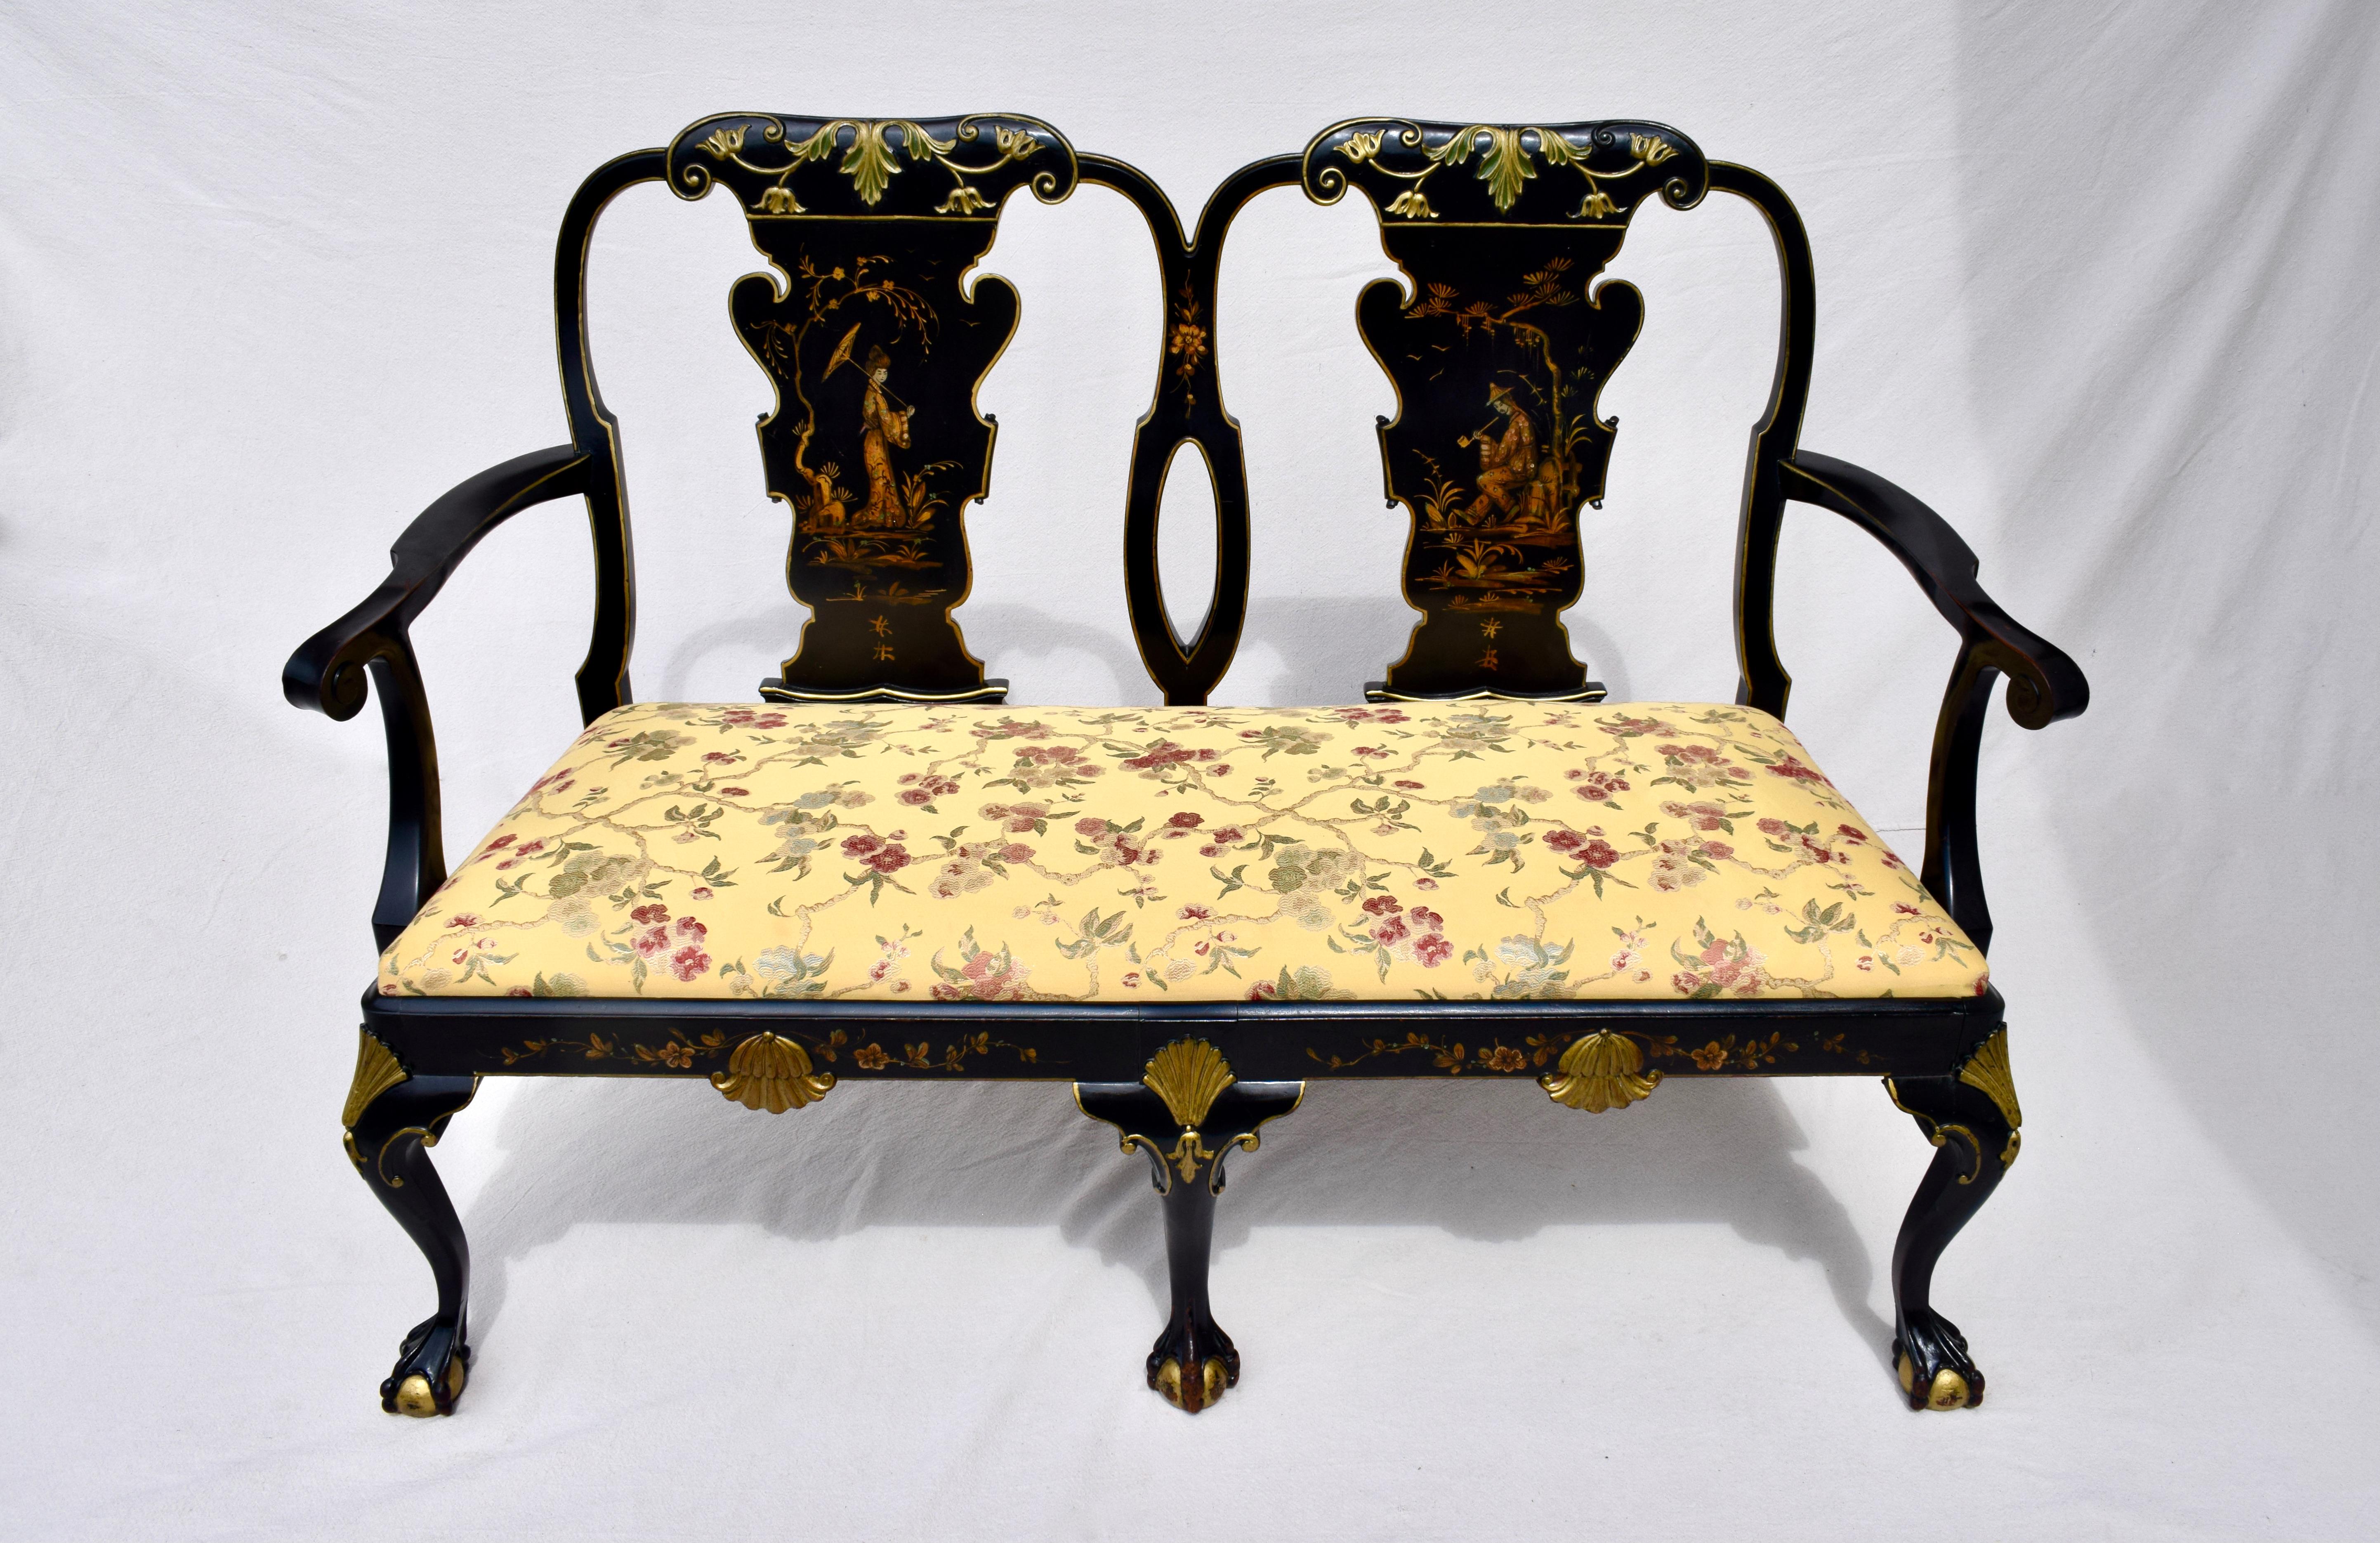 An early 20th c. George II style solid mahogany settee decorated with japan-work, chinoiserie landscapes and figures, on cabriole legs with ball and paw feet. Overall high quality japanning on black lacquered ground with carved relief shell